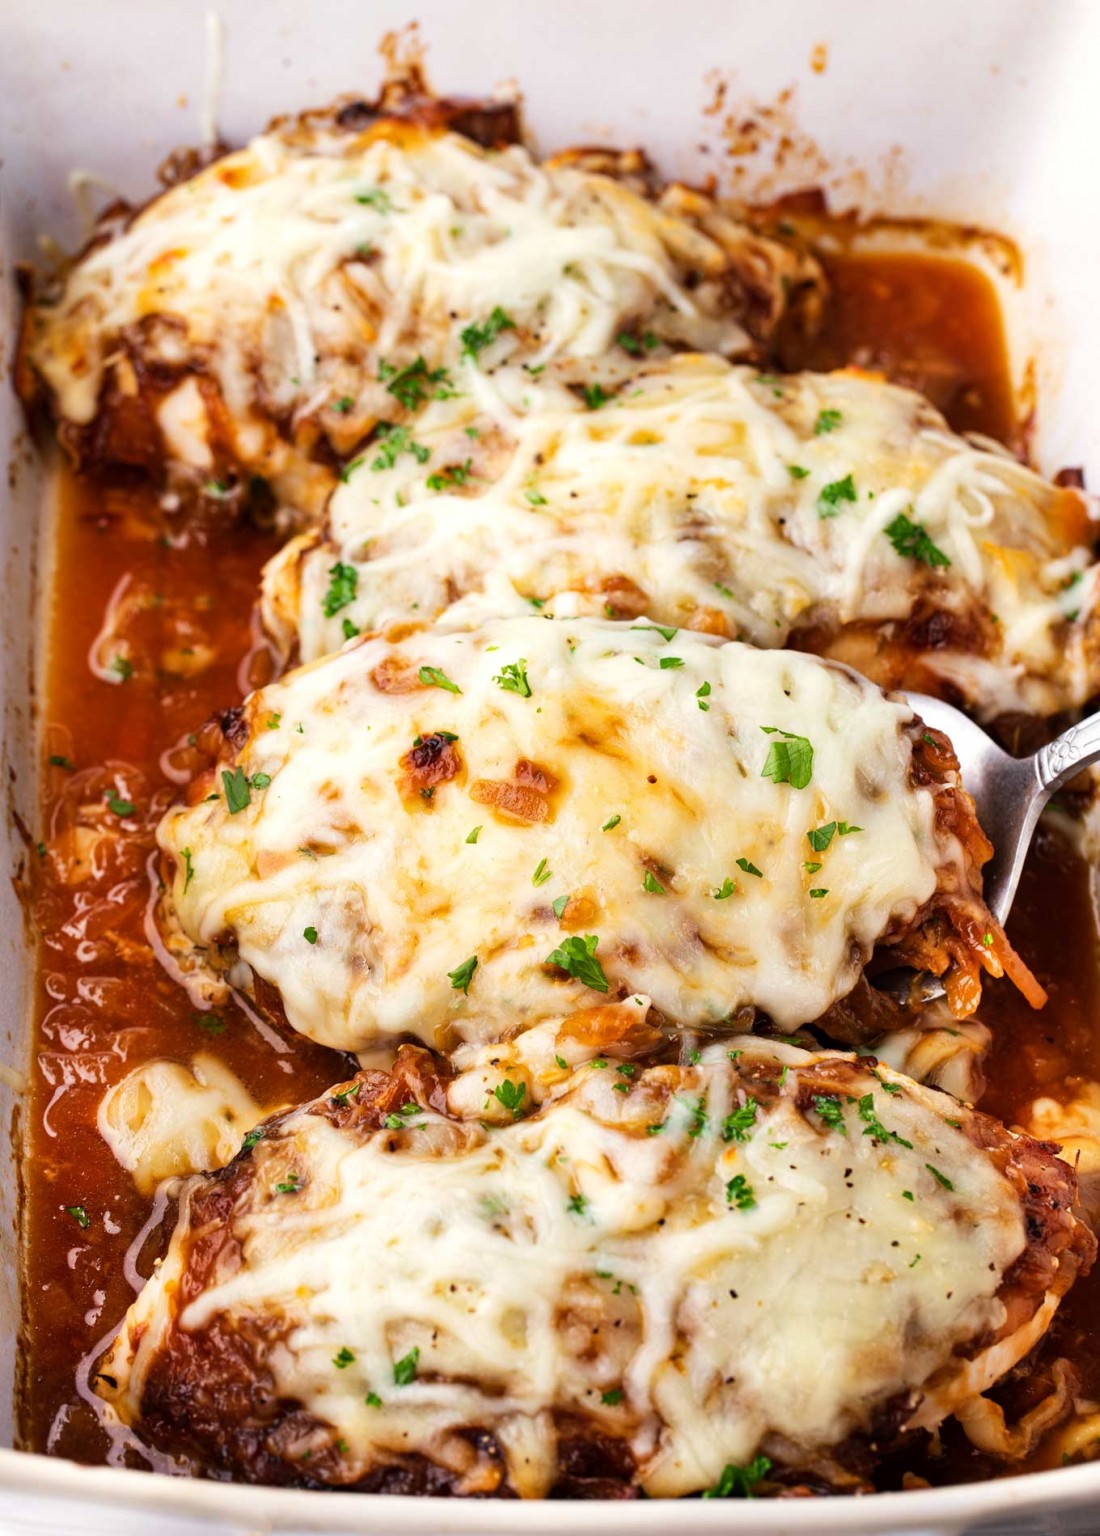 French Onion Baked Chicken (pure comfort food!) - The Chunky Chef